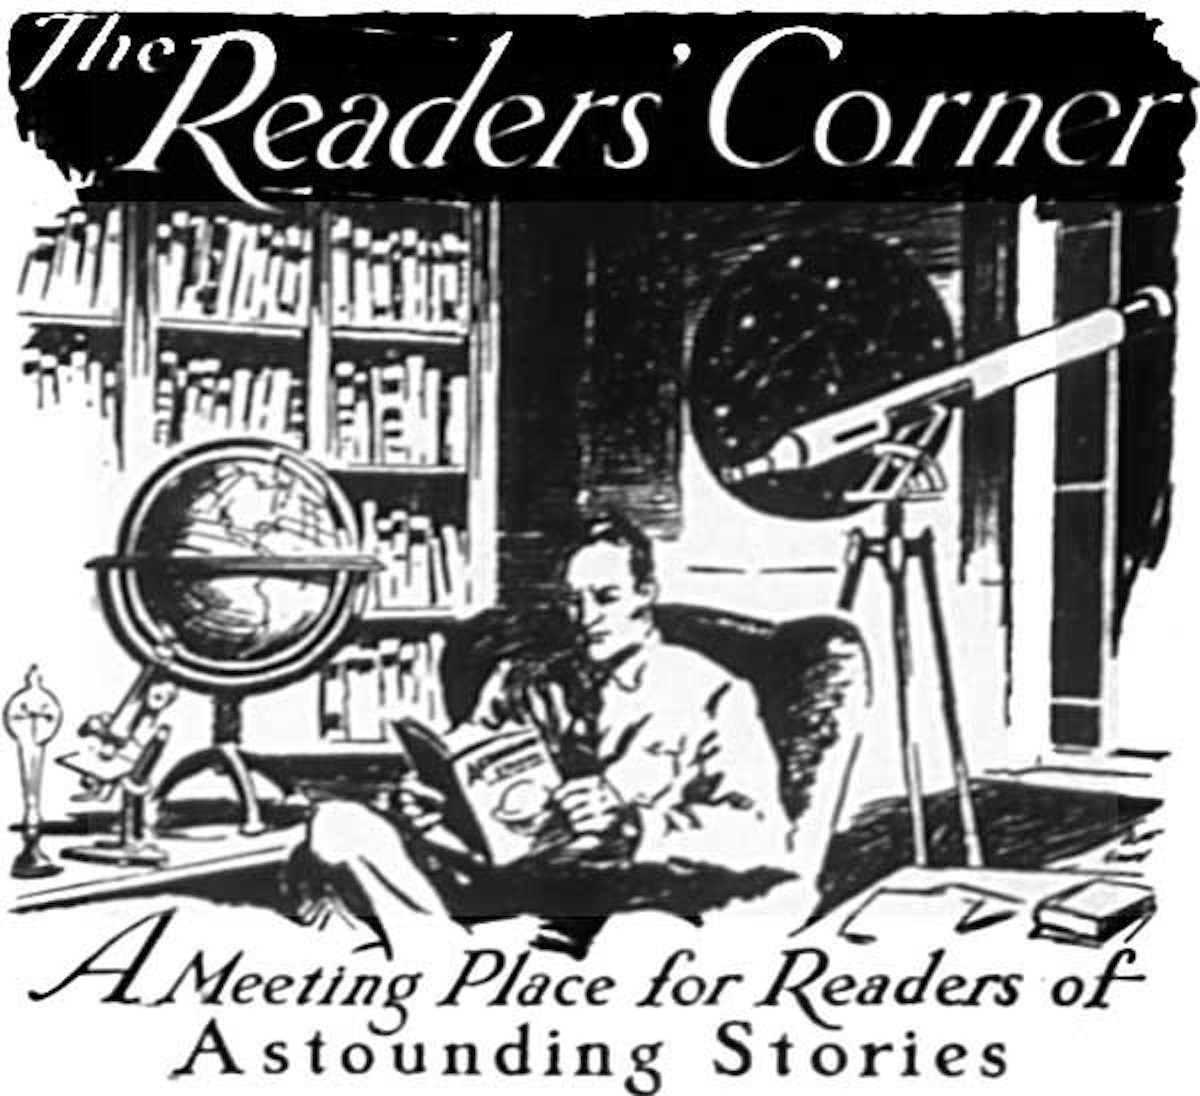 featured image - Astounding Stories of Super-Science July 1931: VOL. VII, No. 1 - The Readers' Corner